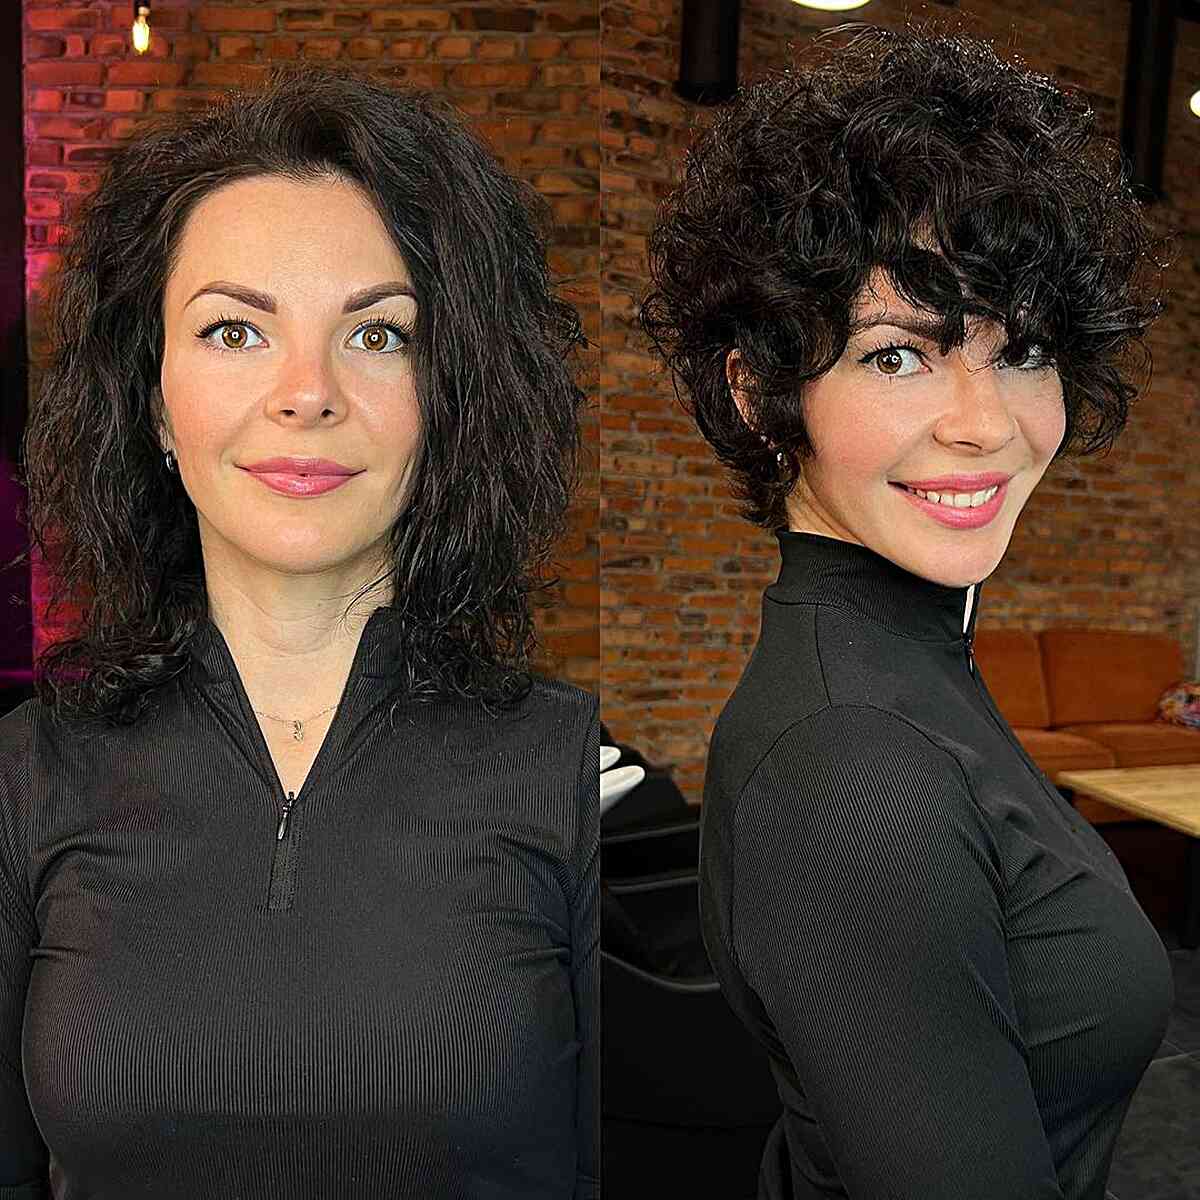 Curly and Thick Long Pixie Cut for women with a chic style